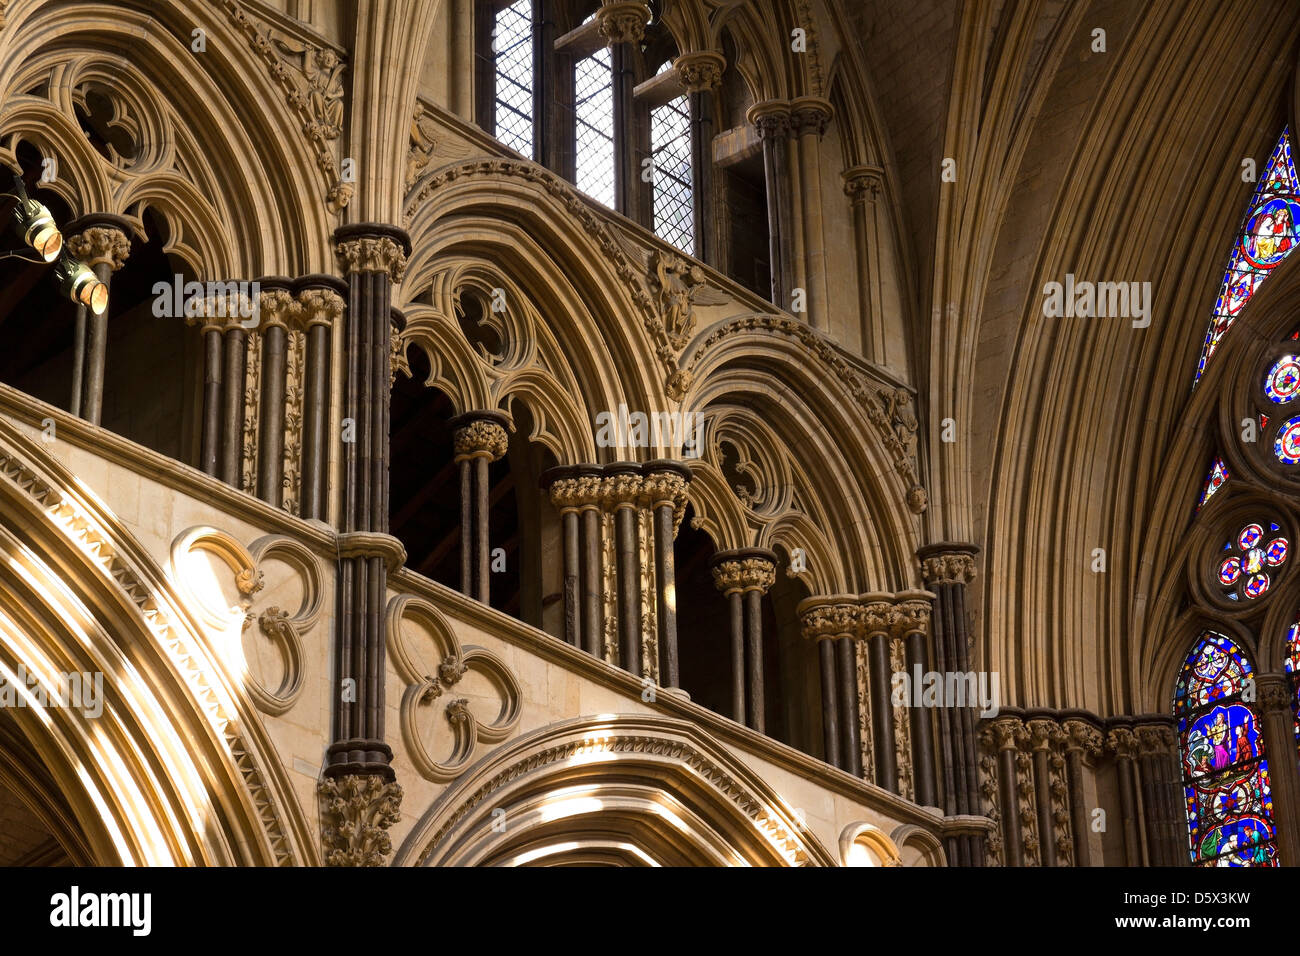 Pointed Gothic stone masonry arches in Angel Choir of Lincoln Cathedral, Lincolnshire, England, UK Stock Photo